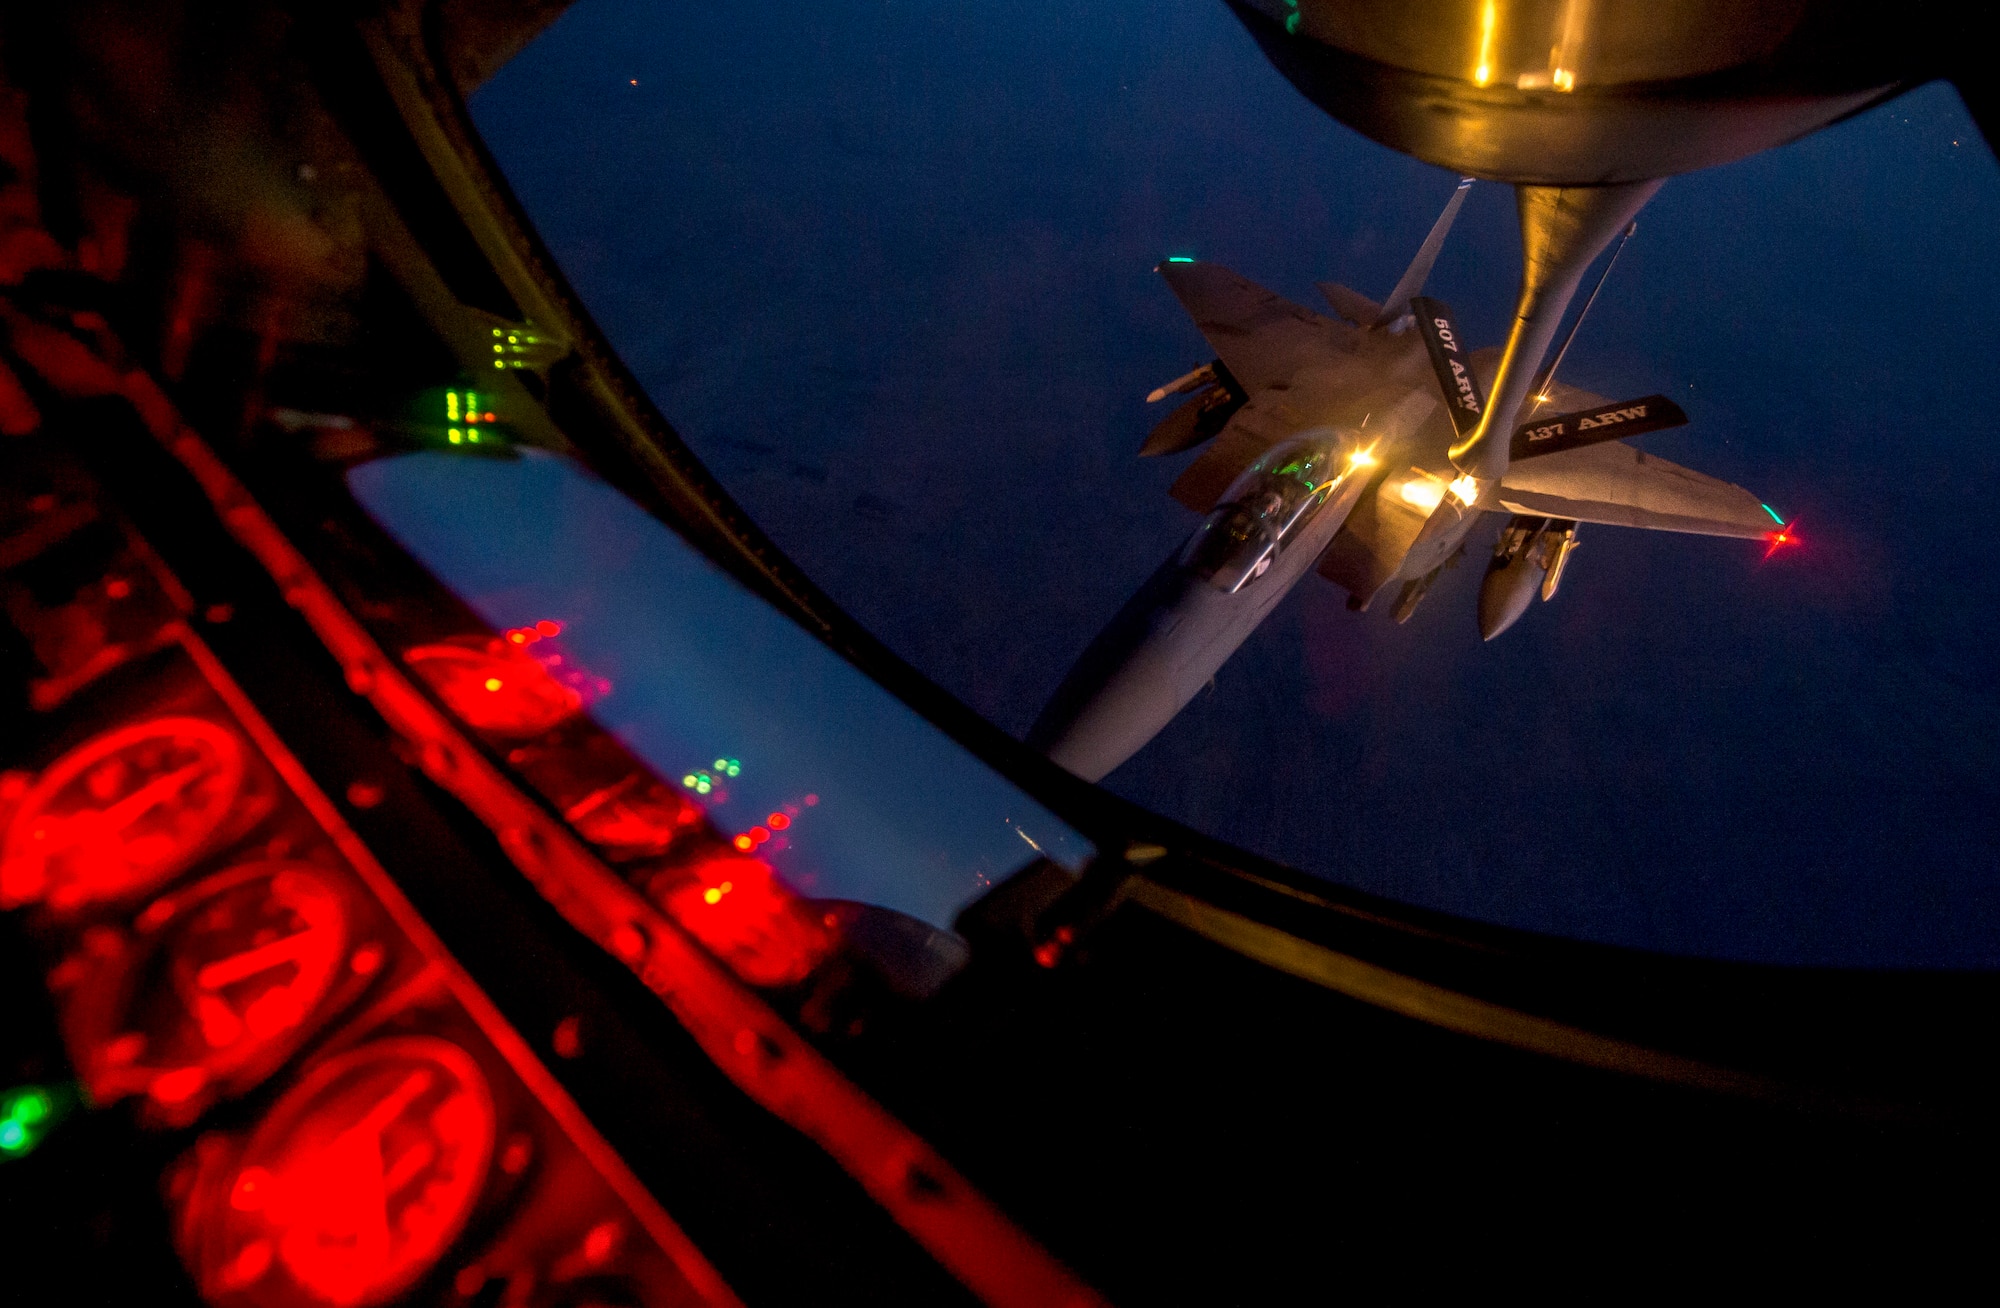 A U.S. Air Force F-15E Strike Eagle receives fuel from a KC-135R Stratotanker from the 507th and 137th Air Refueling Wing over northern Iraq after conducting airstrikes in Syria, Sept. 23, 2014.These aircraft were part of a large coalition strike package that was the first to strike ISIL targets in Syria. (U.S. Air Force photo by Senior Airman Matthew Bruch/Released)
